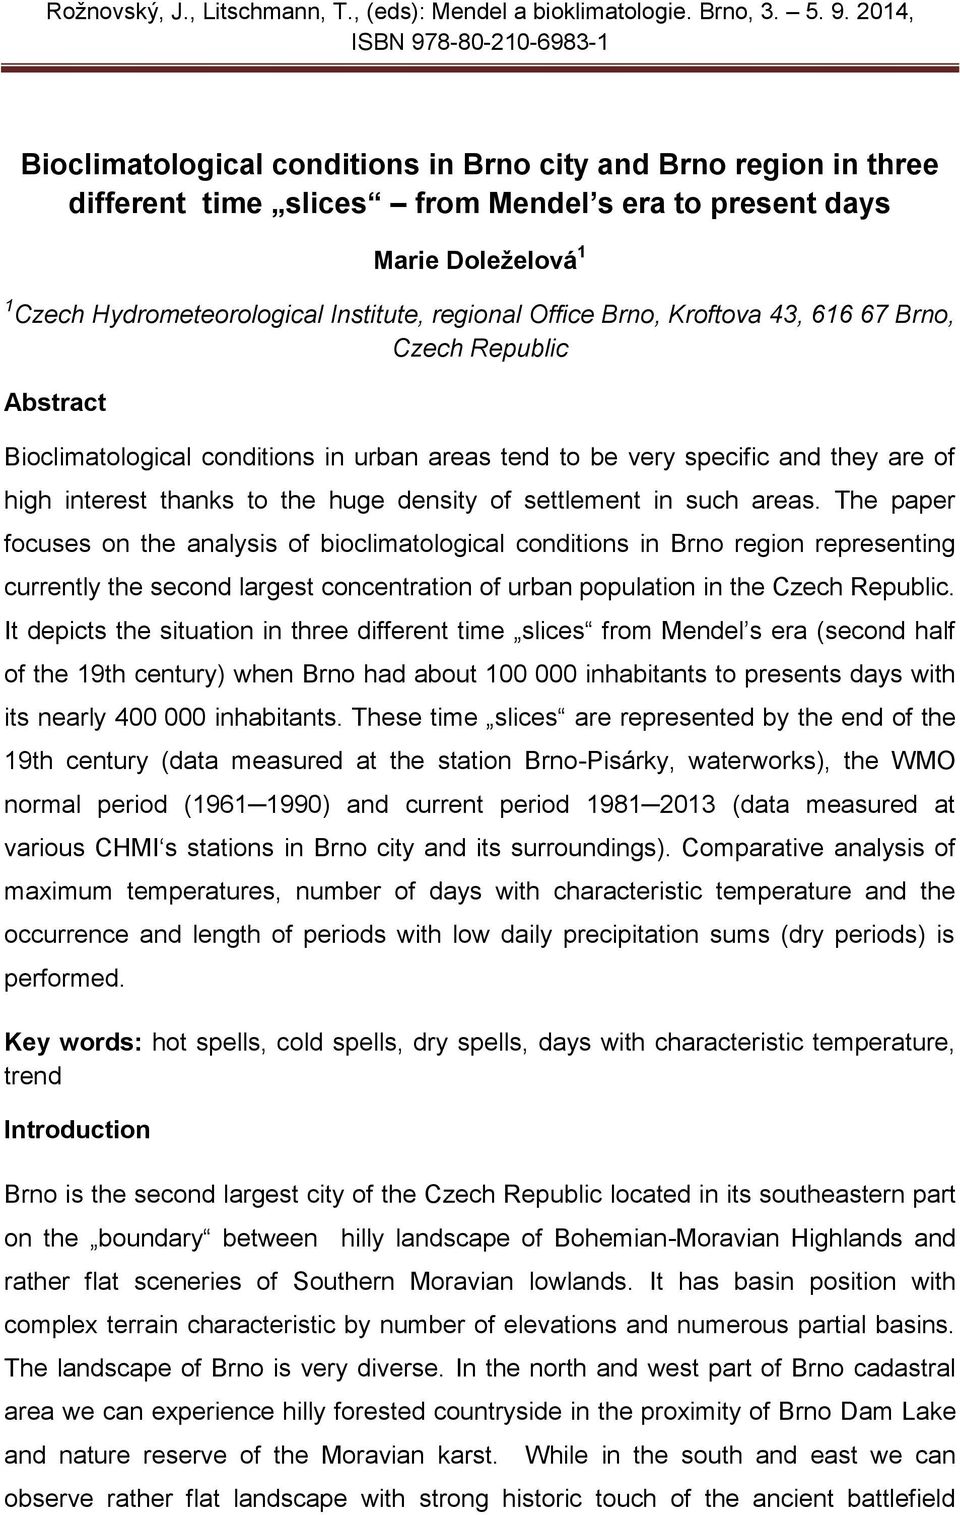 Institute, regional Office Brno, Kroftova 43, 616 67 Brno, Abstract Czech Republic Bioclimatological conditions in urban areas tend to be very specific and they are of high interest thanks to the